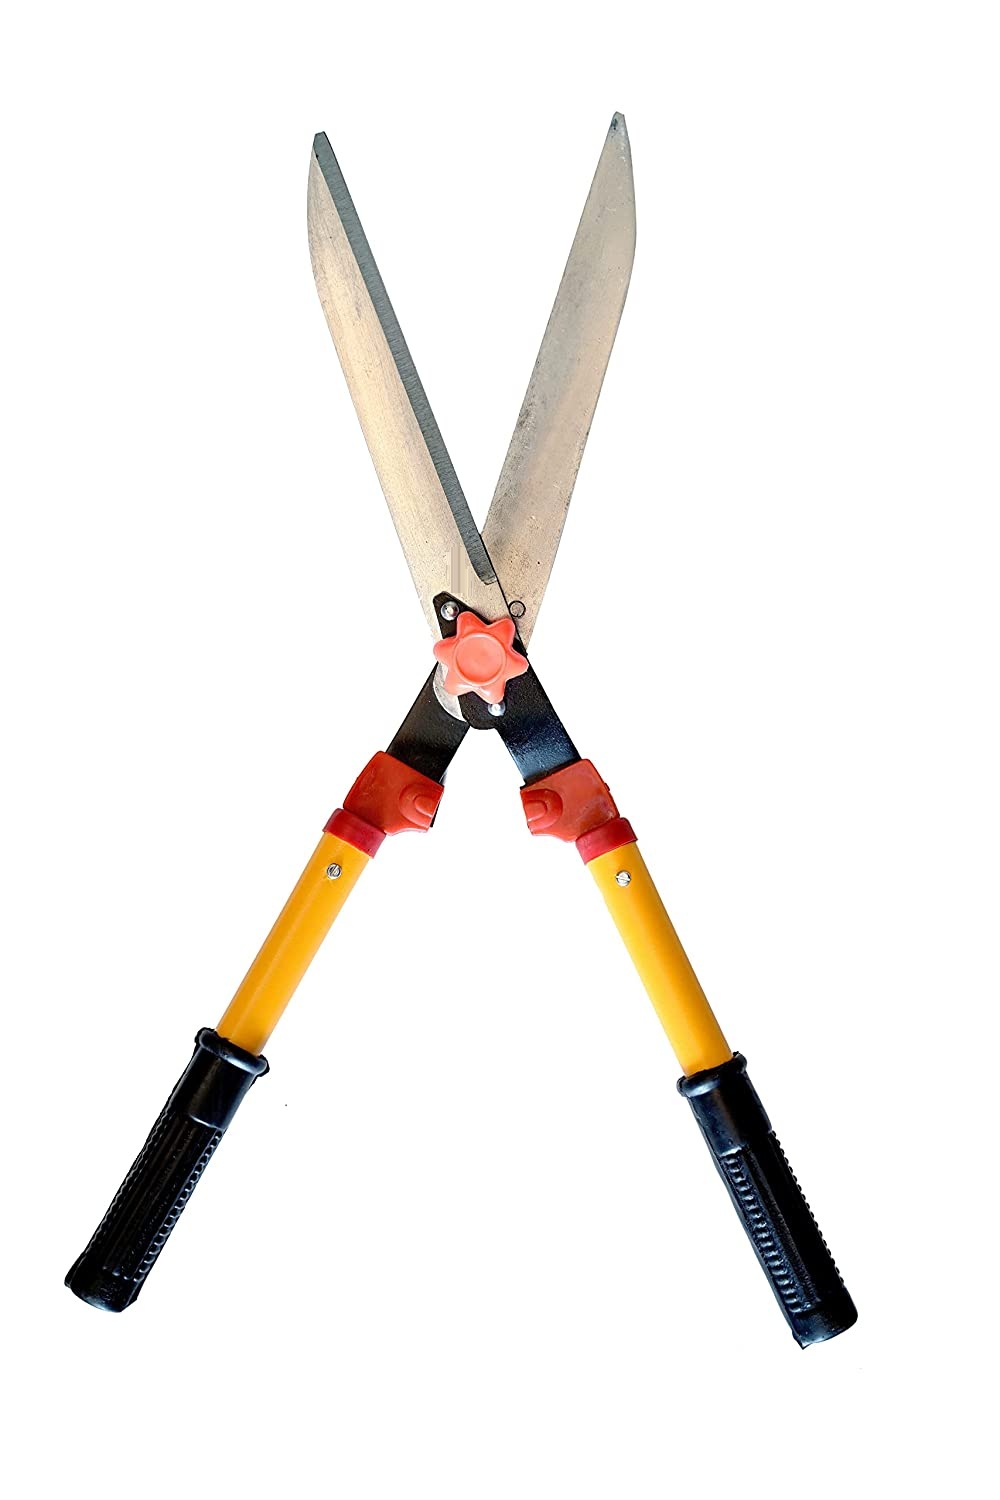 Spl Pipe Handle Hedge Shears for Gardening